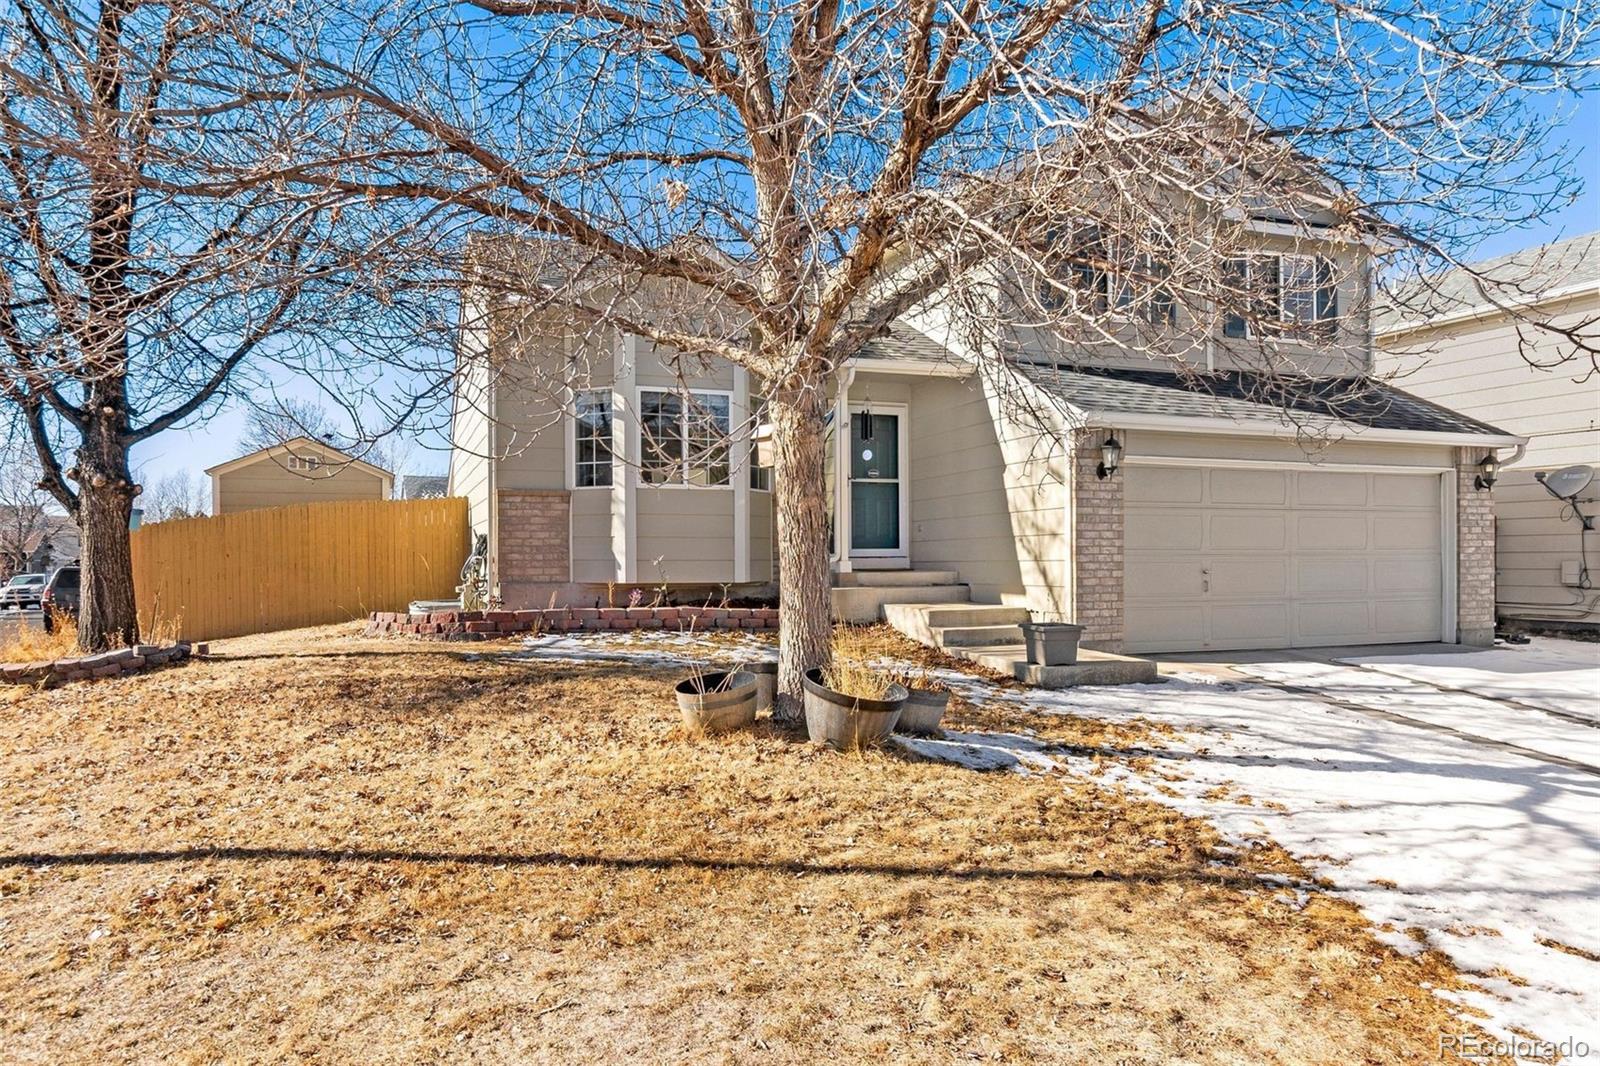 5333 s valdai street, aurora sold home. Closed on 2024-04-01 for $550,000.